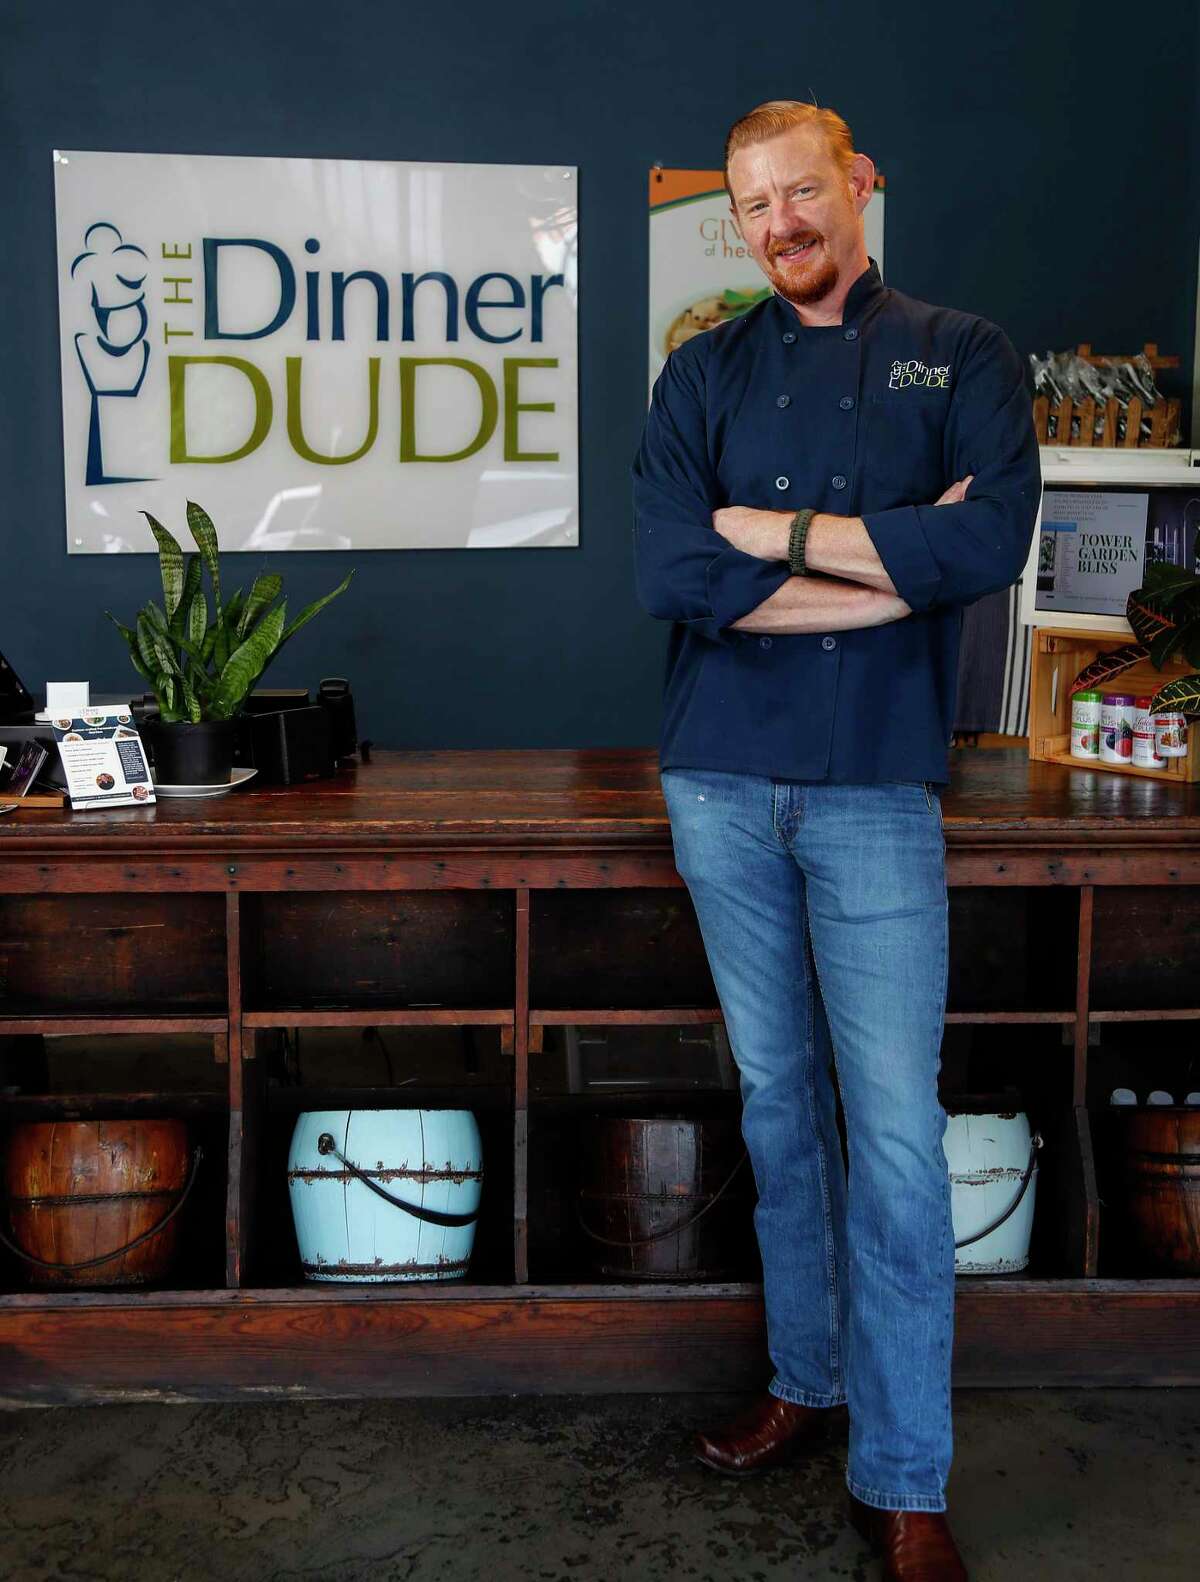 Mark Zoch grew up watching his mother struggle with weight and related health issues. Now, he's created a business, called "The Dinner Dude" to help others lose weight.